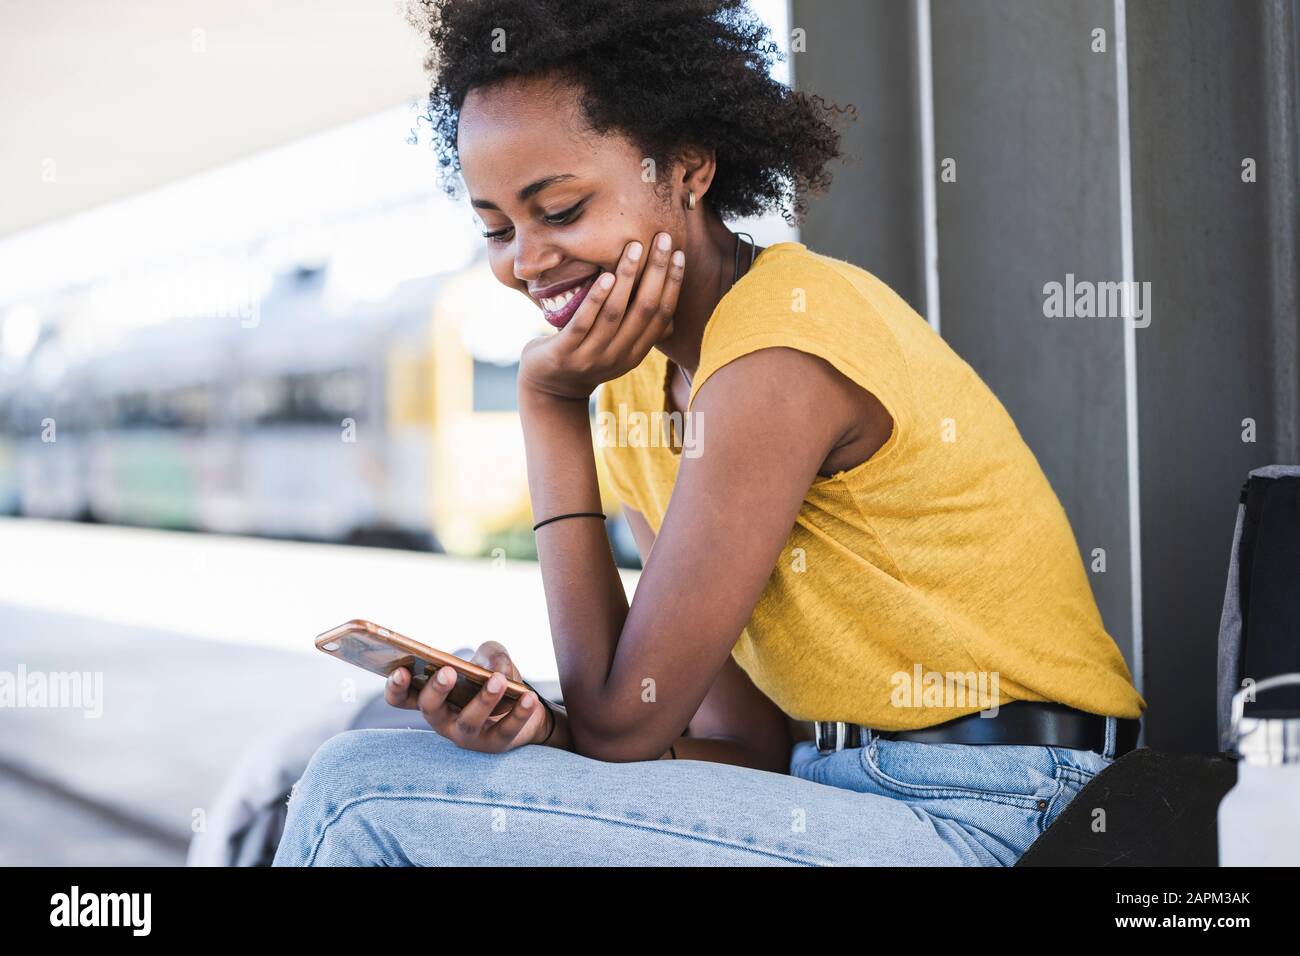 Smiling young woman using cell phone at the train station Stock Photo